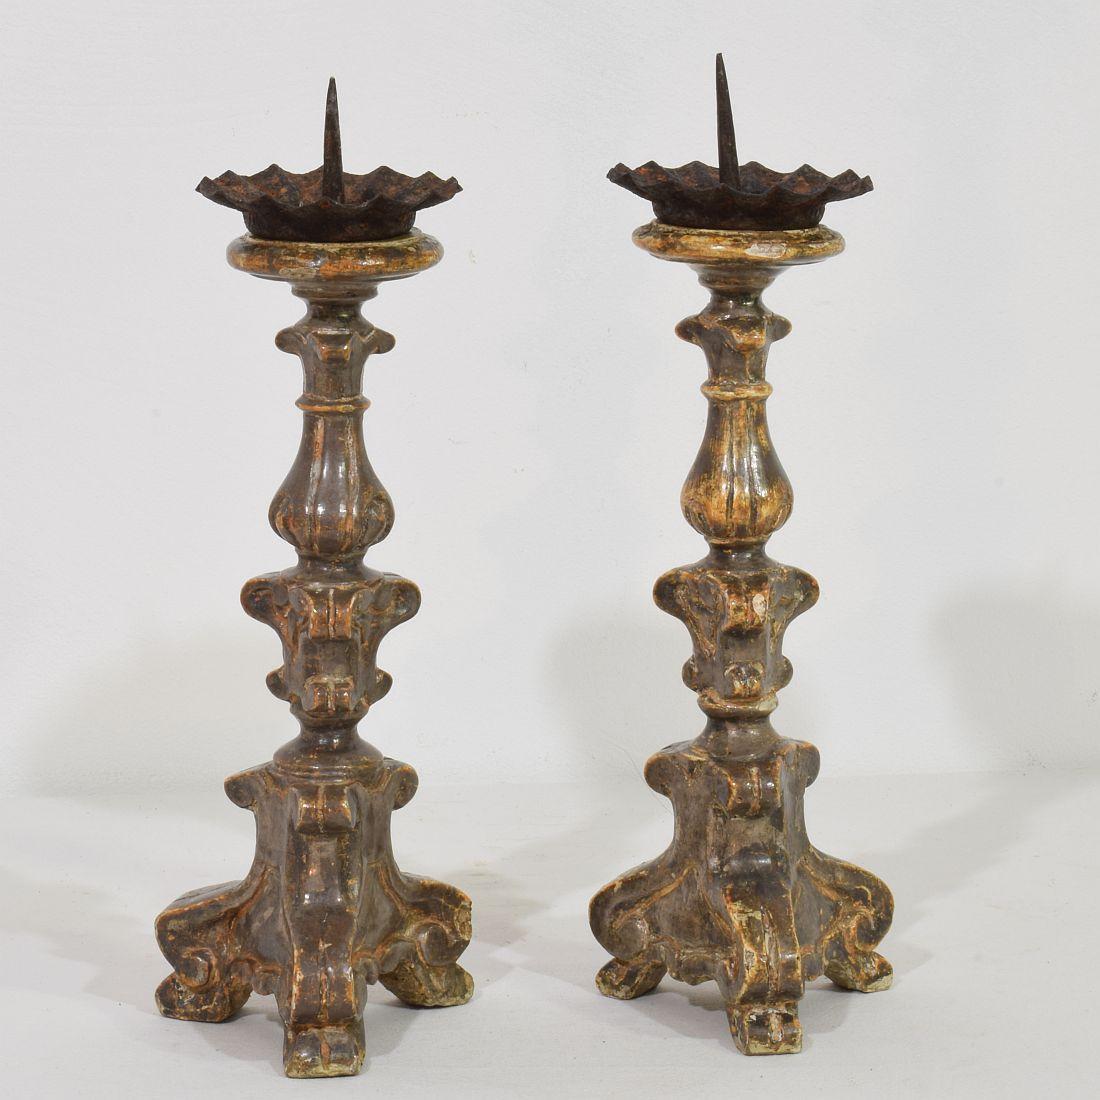 Hand-Carved Couple of 18th Century Italian Baroque Silvered Candlesticks